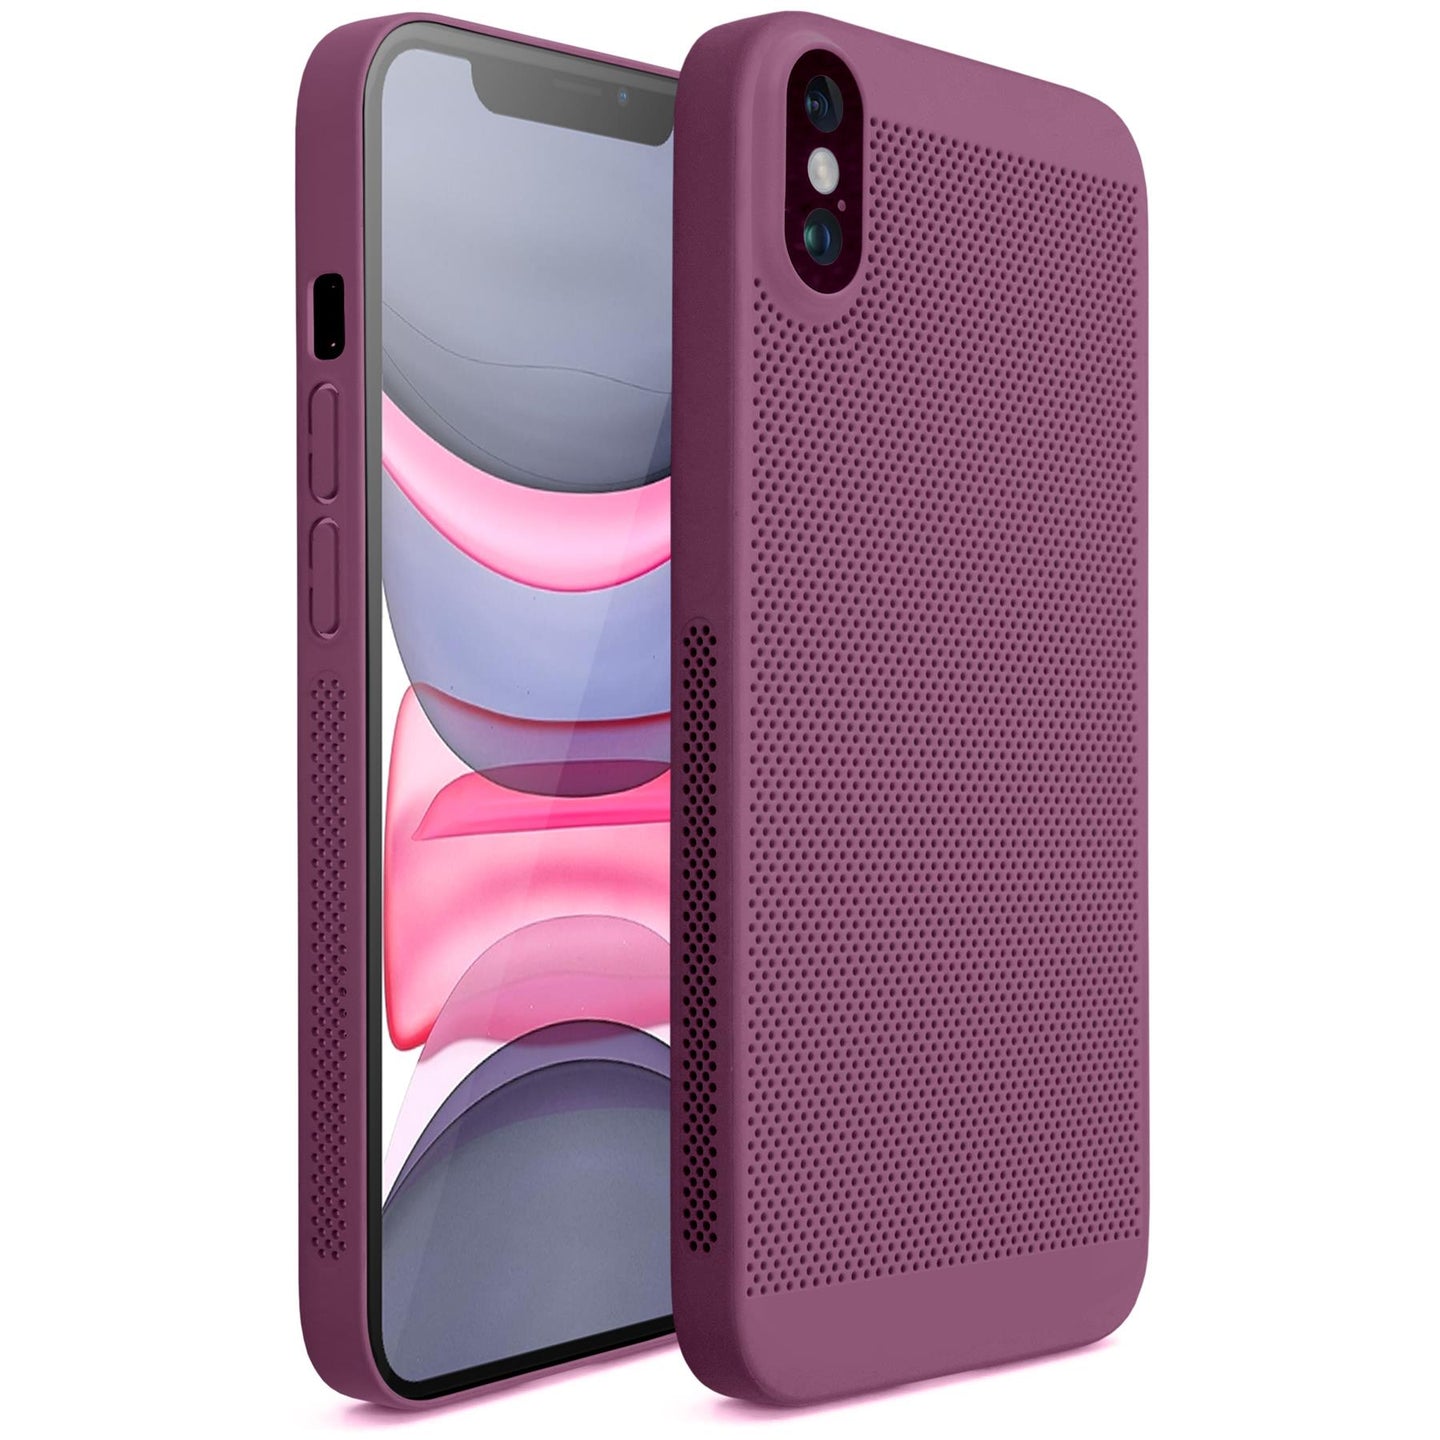 Moozy VentiGuard Phone Case for iPhone X / XS, Purple, 5.8-inch - Breathable Cover with Perforated Pattern for Air Circulation, Ventilation, Anti-Overheating Phone Case